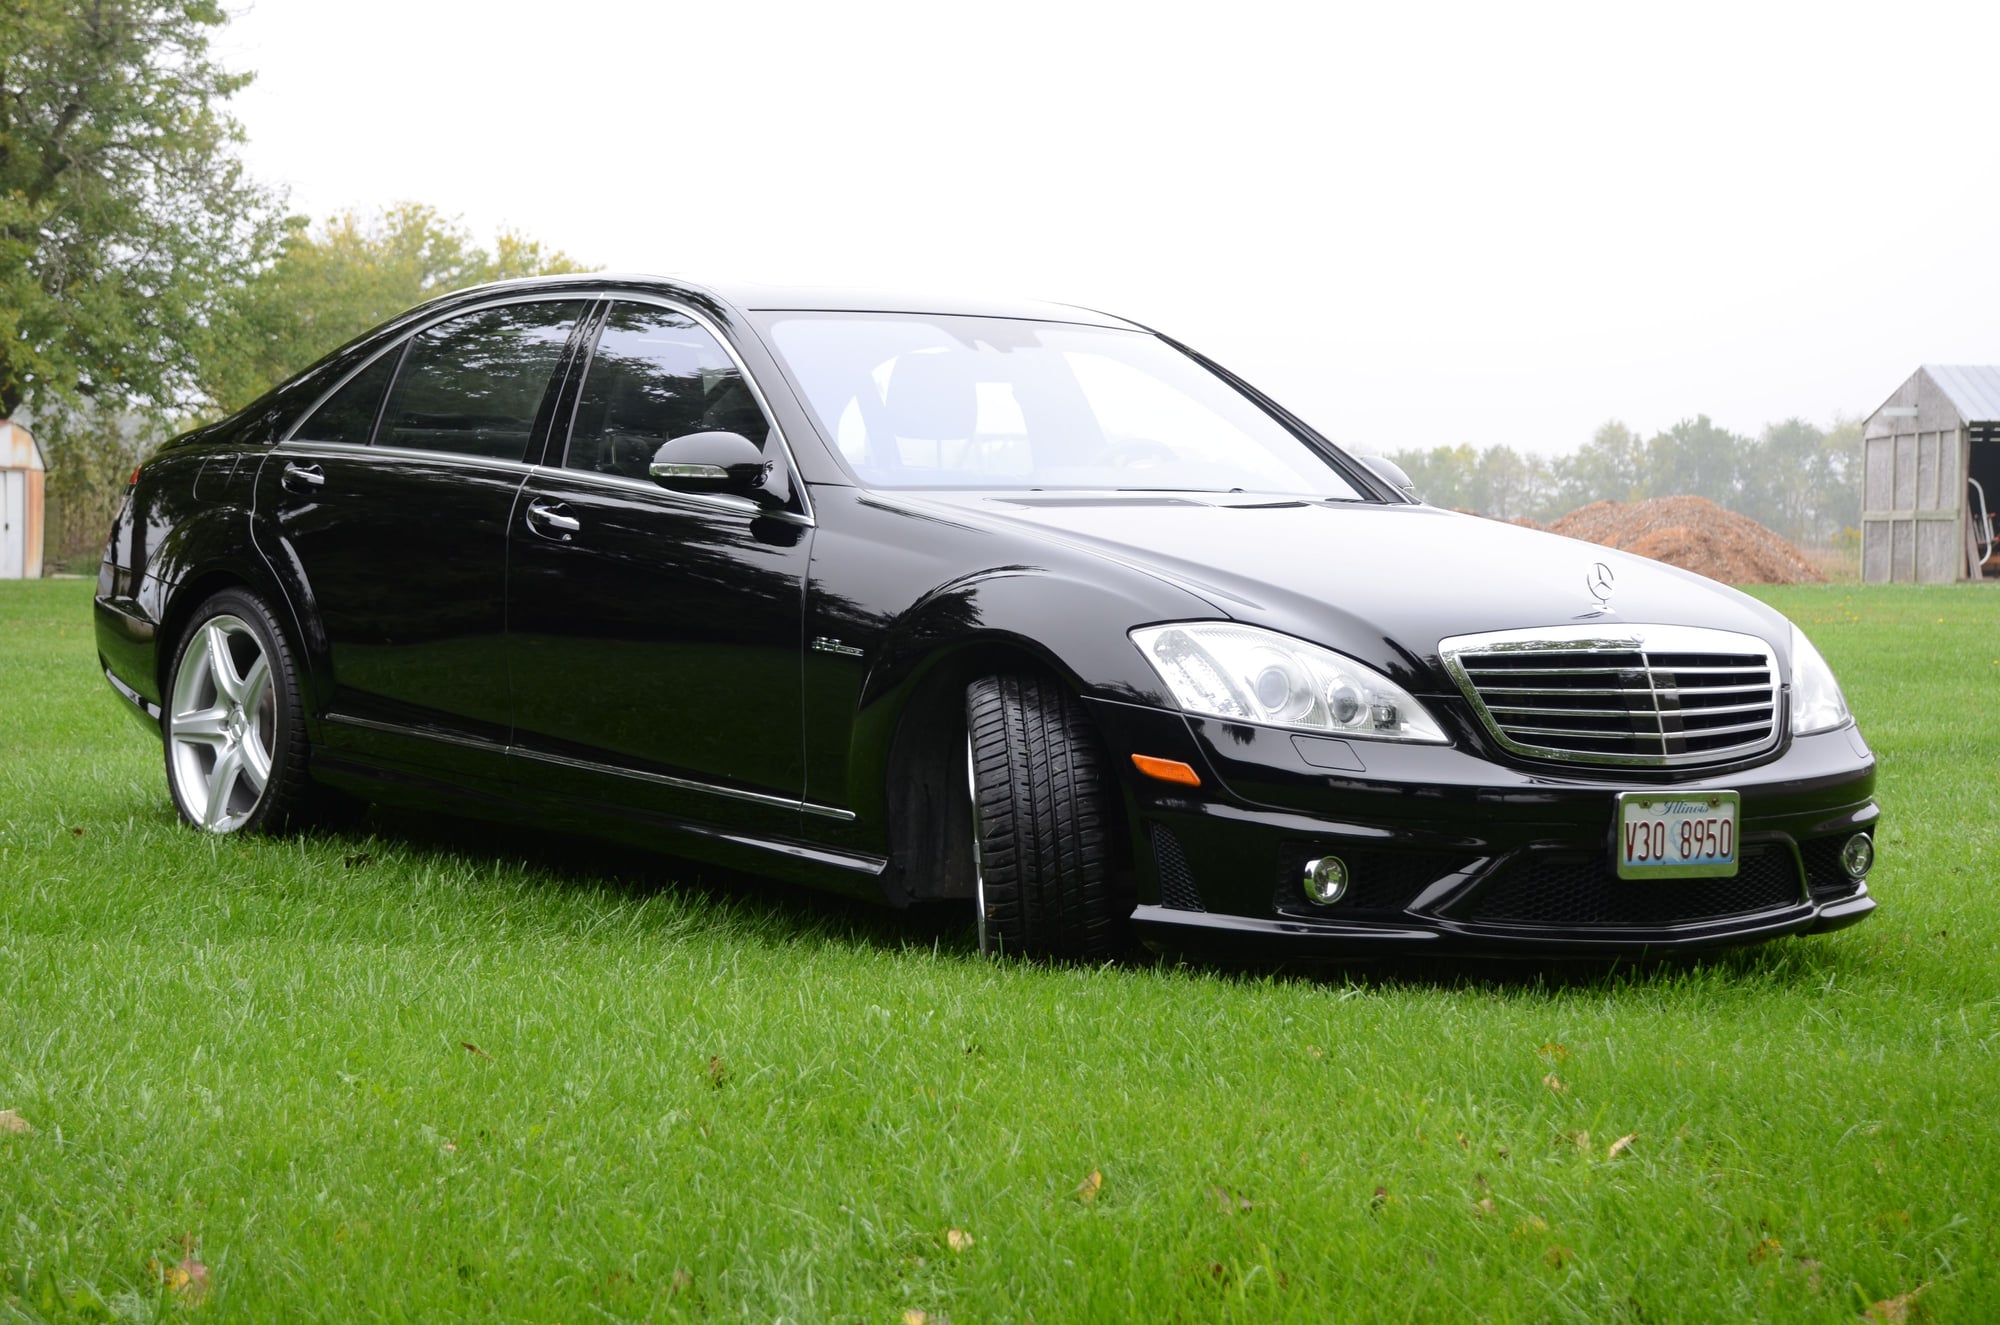 2008 Mercedes-Benz S63 AMG - 2008 Mercedes S63 2nd- Owner W221 All OEM Original - Used - VIN WDDNG77X48A154350 - 89,500 Miles - 8 cyl - 2WD - Automatic - Sedan - Black - South Chicagoland, IL 60935, United States